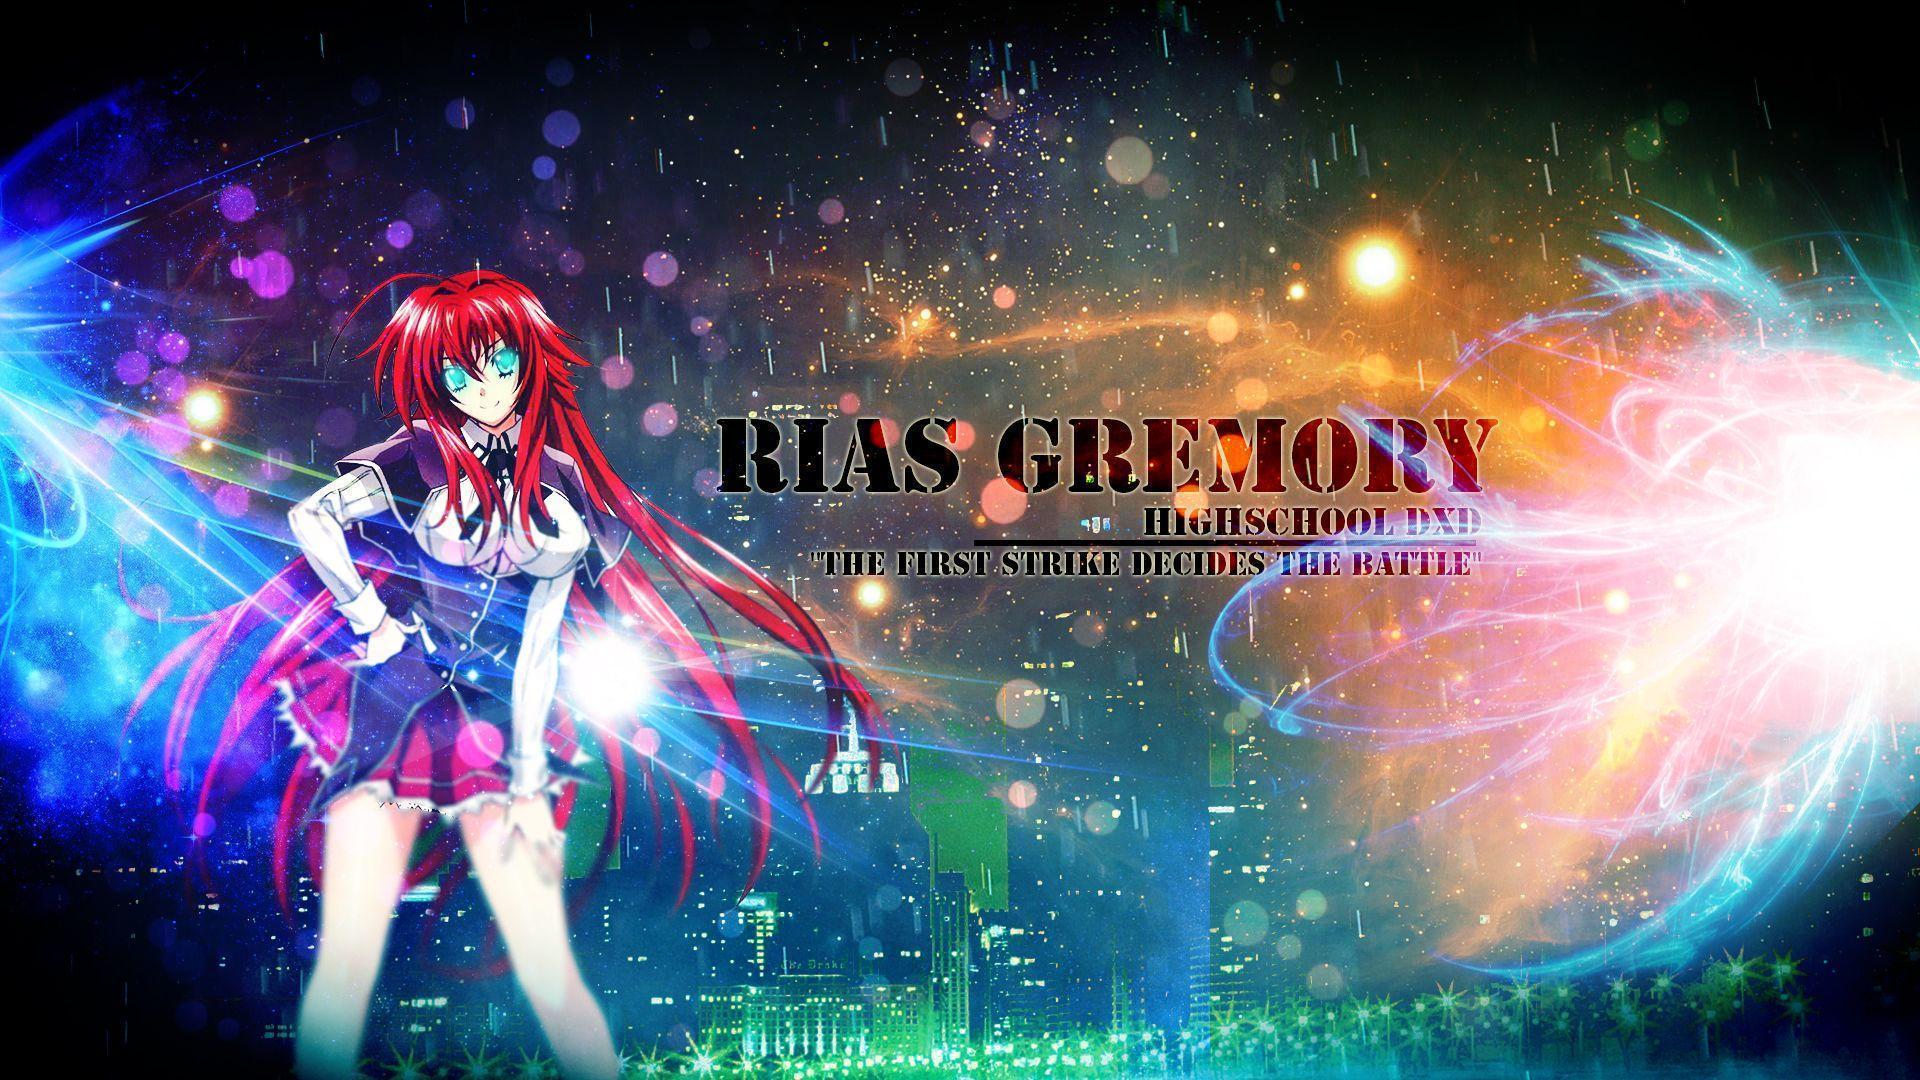 Rias Gremory Anime Locker & Wallpapers for Android - APK 